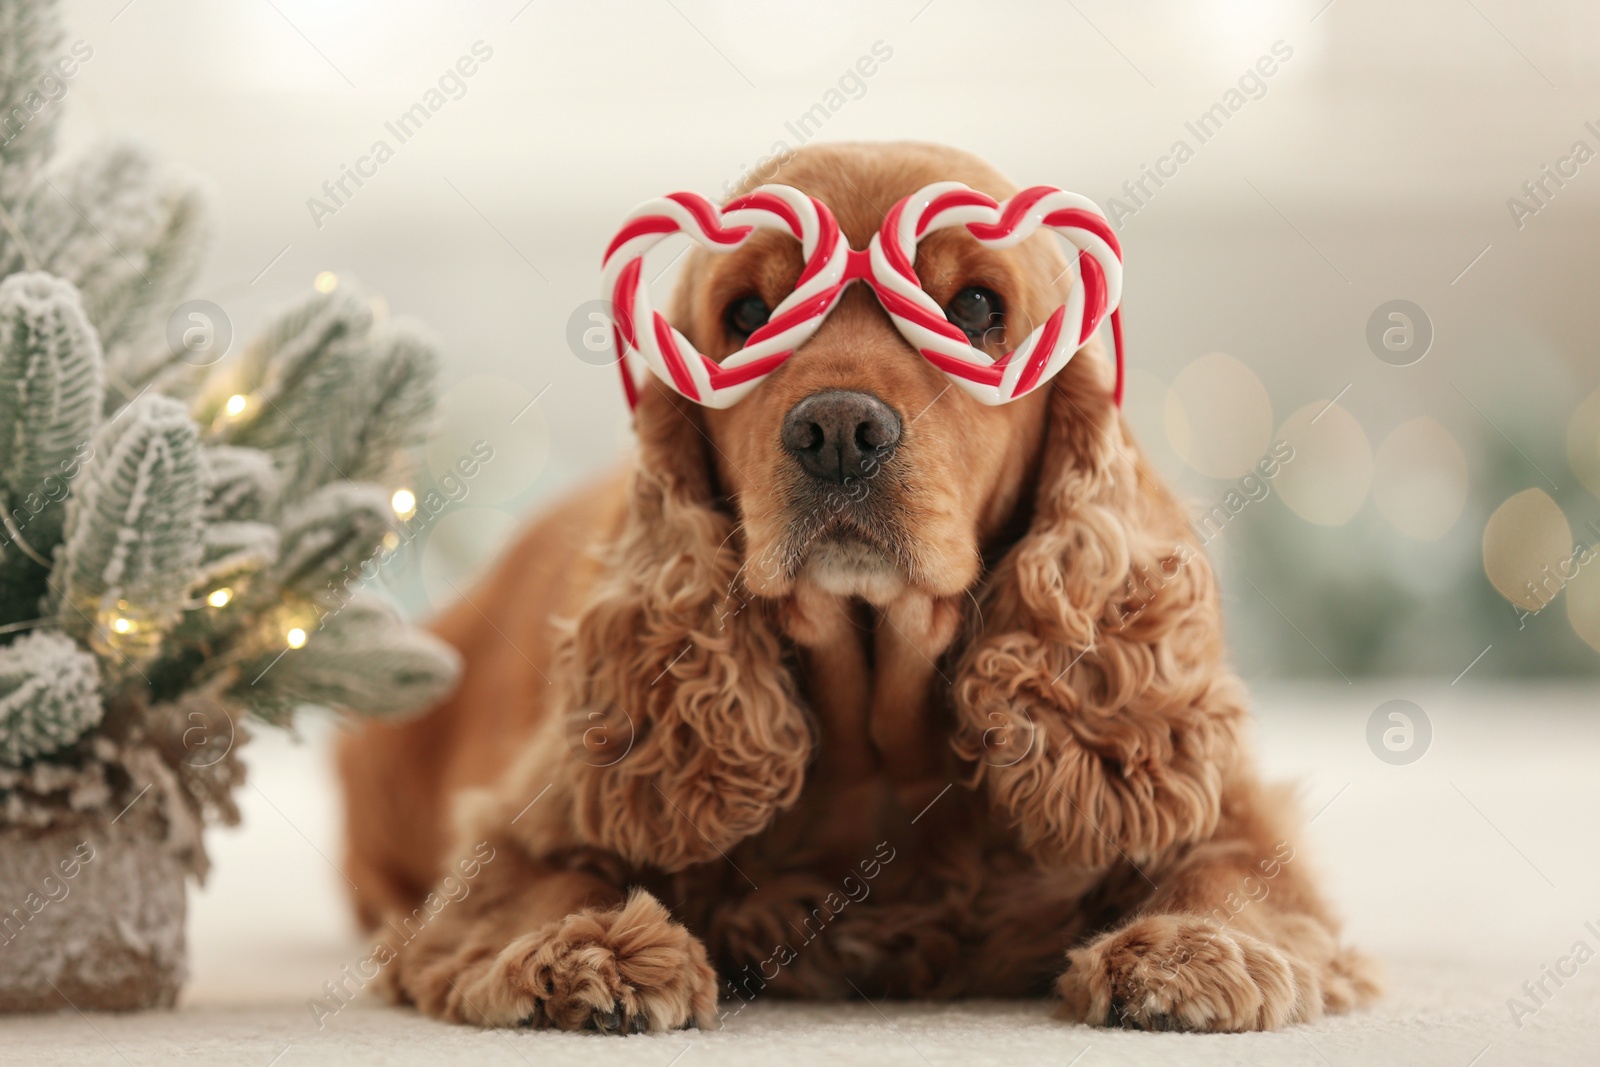 Photo of Adorable Cocker Spaniel dog in party glasses near decorative Christmas tree